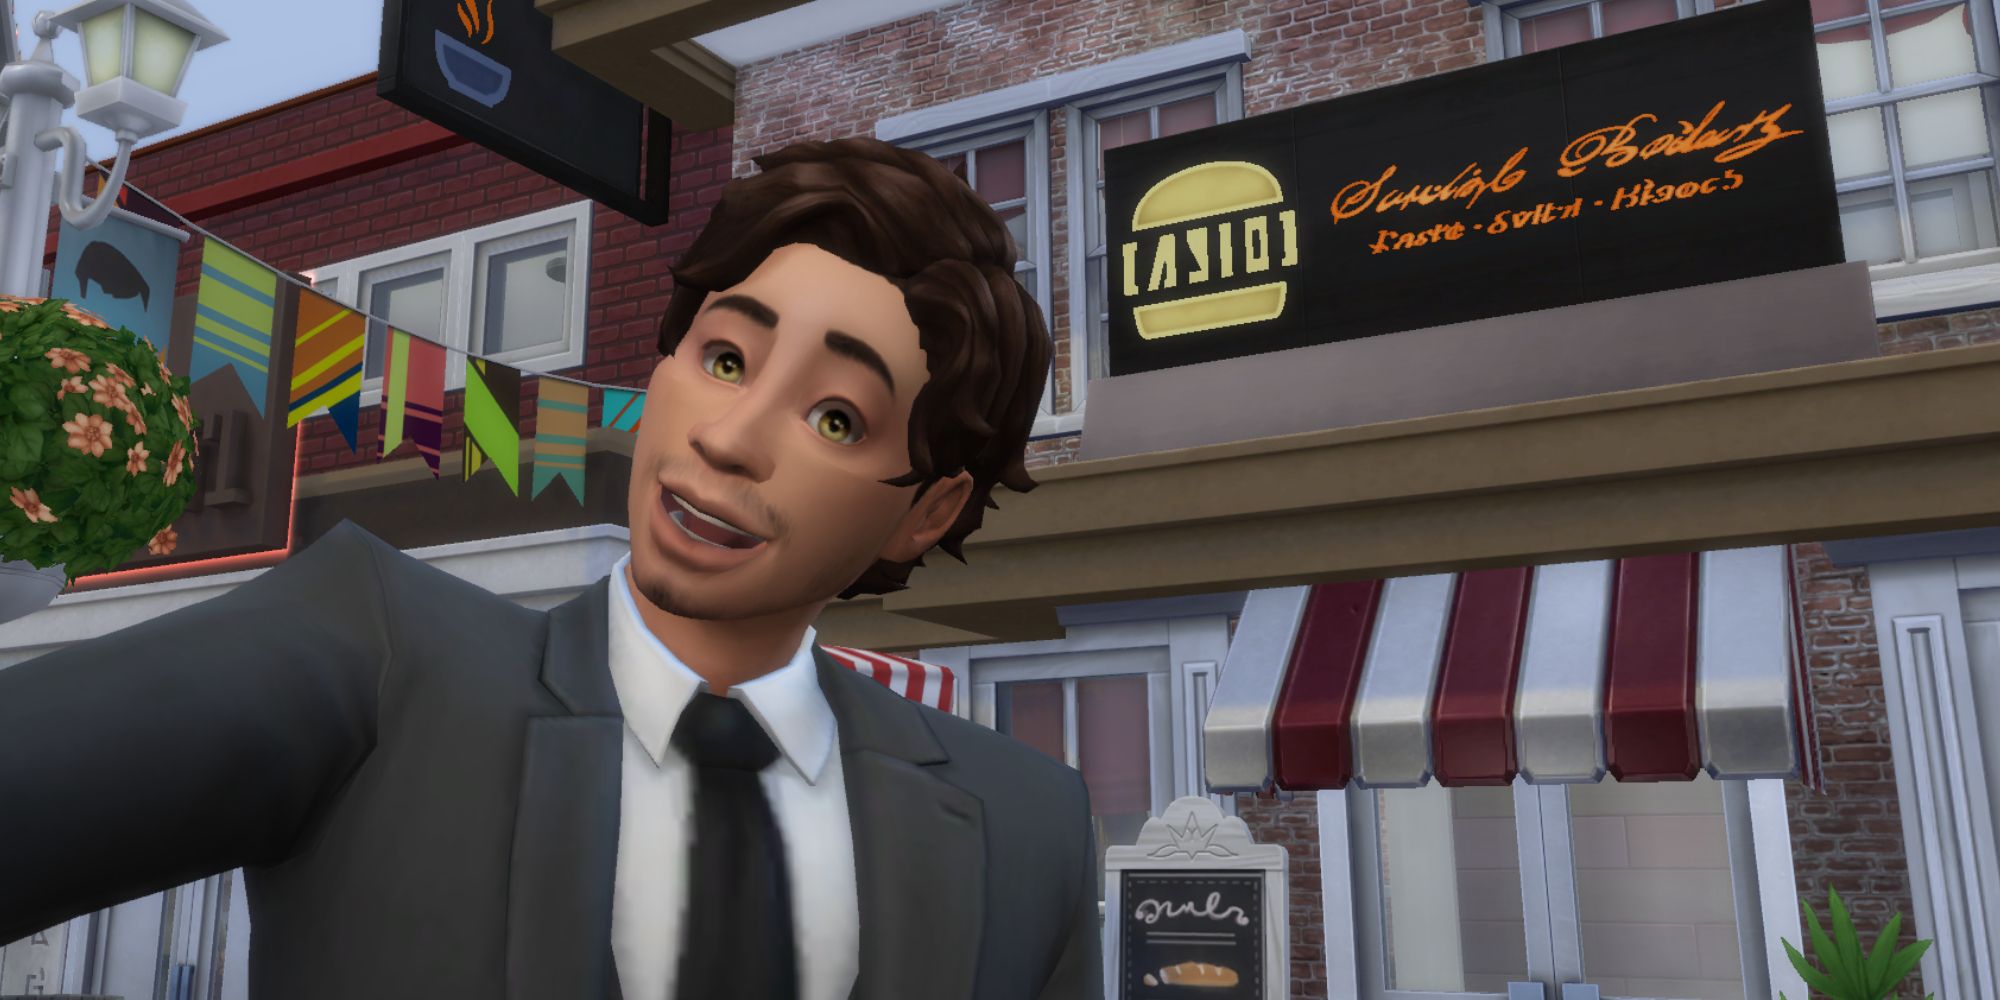 A Sim takes a selfie in front of his new restaurant in The Sims 4